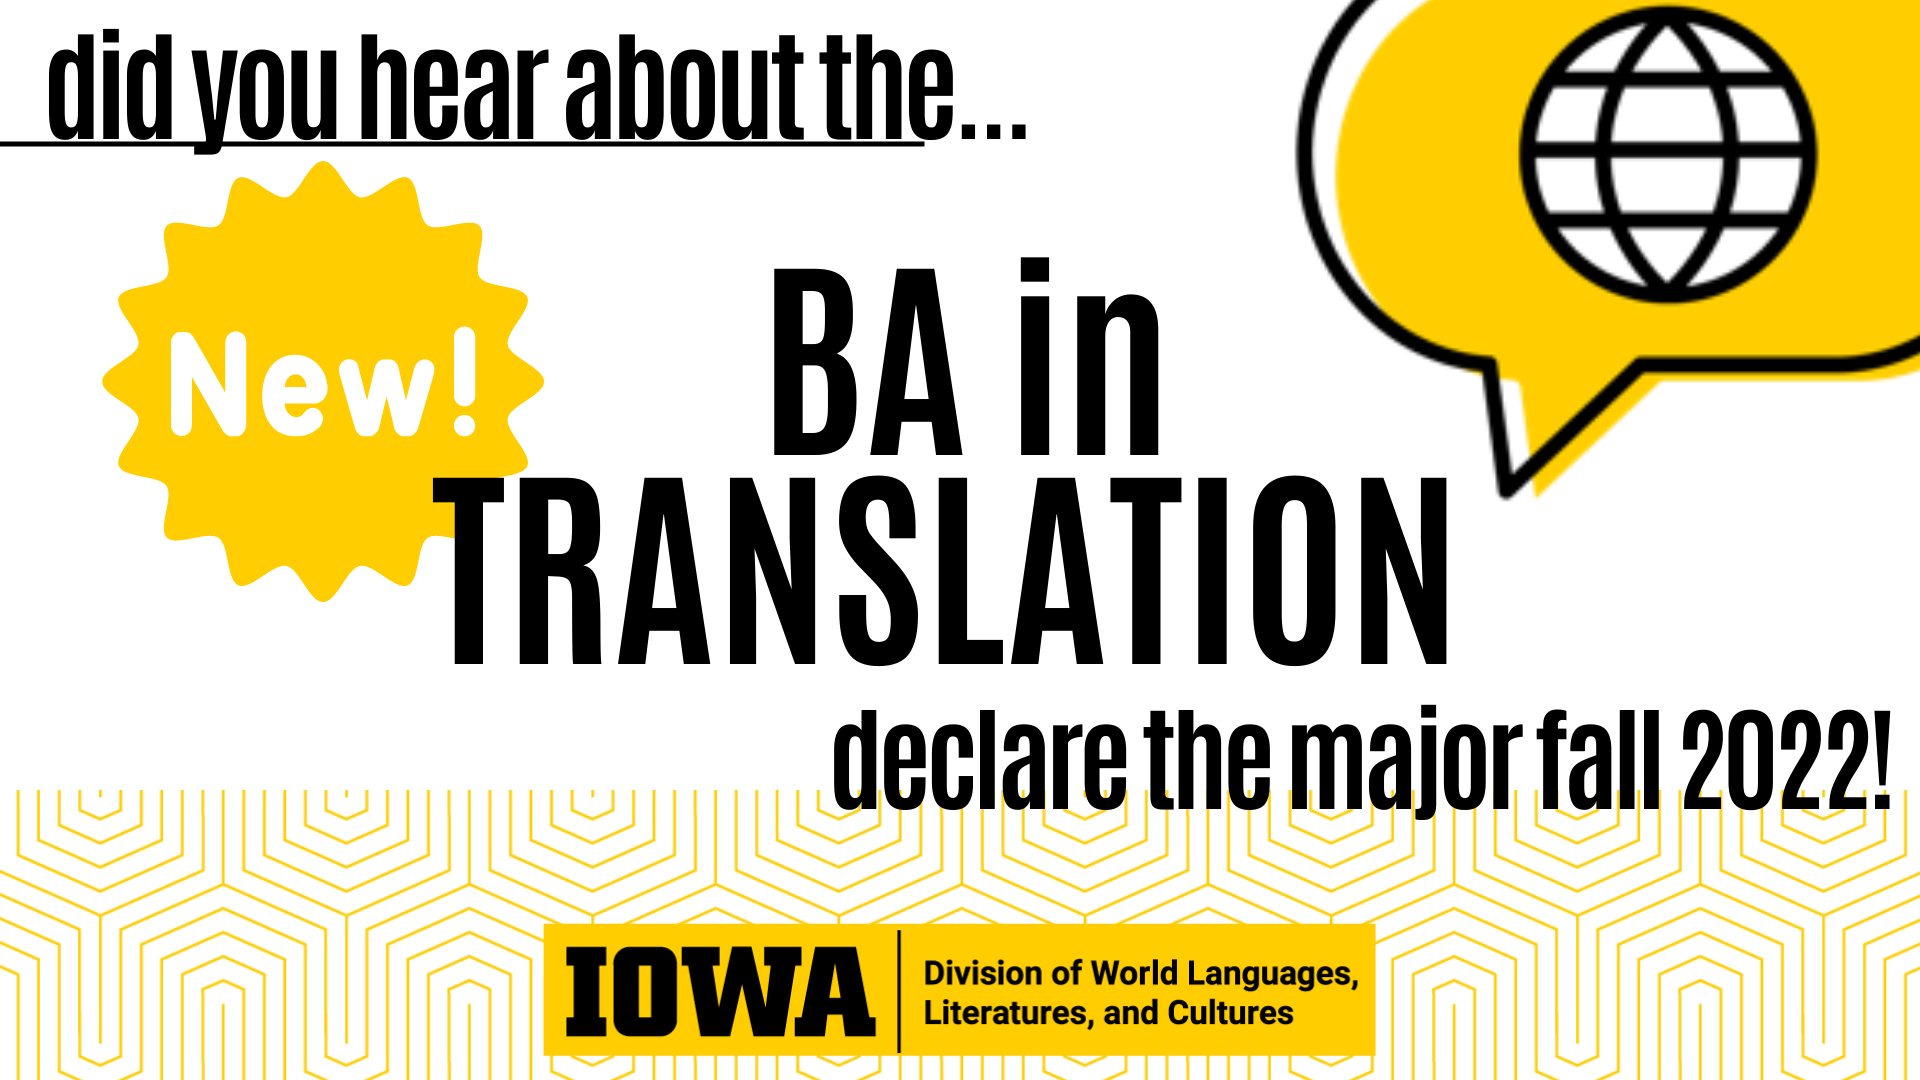 Did you hear about the new BA in translation declared the major fall 2022